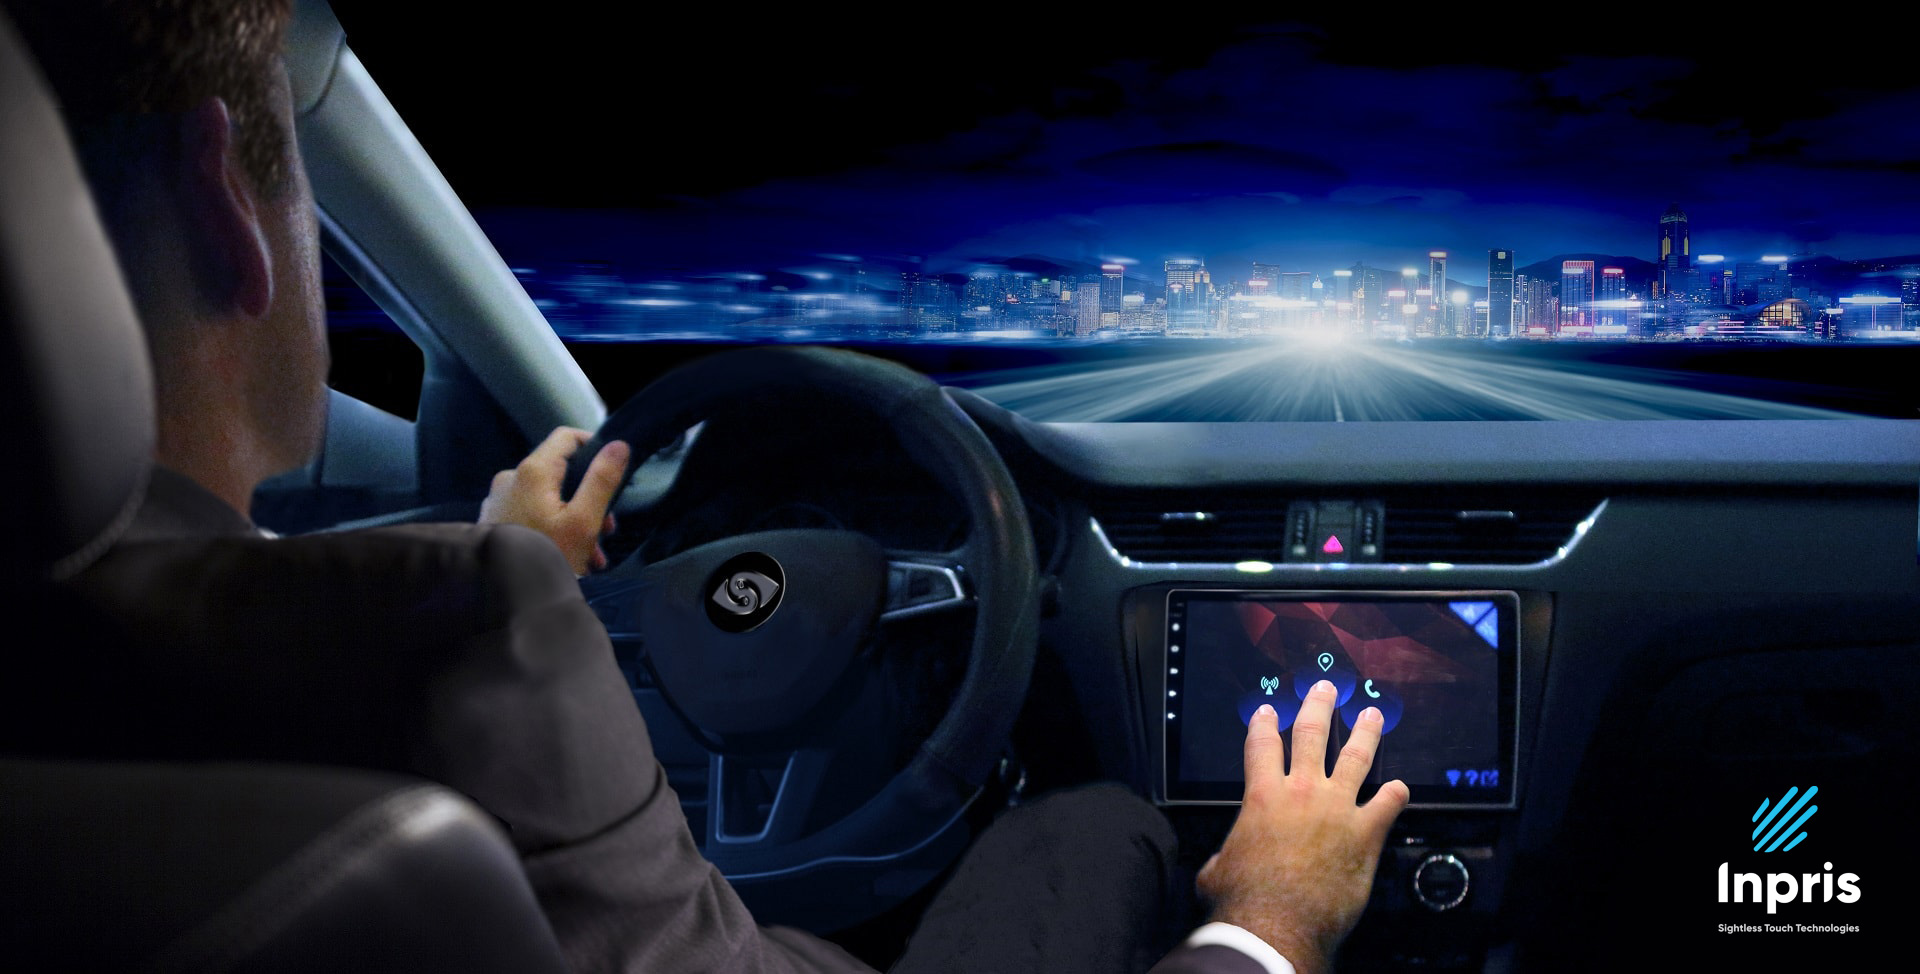 Meet the new technology on the screen of cars